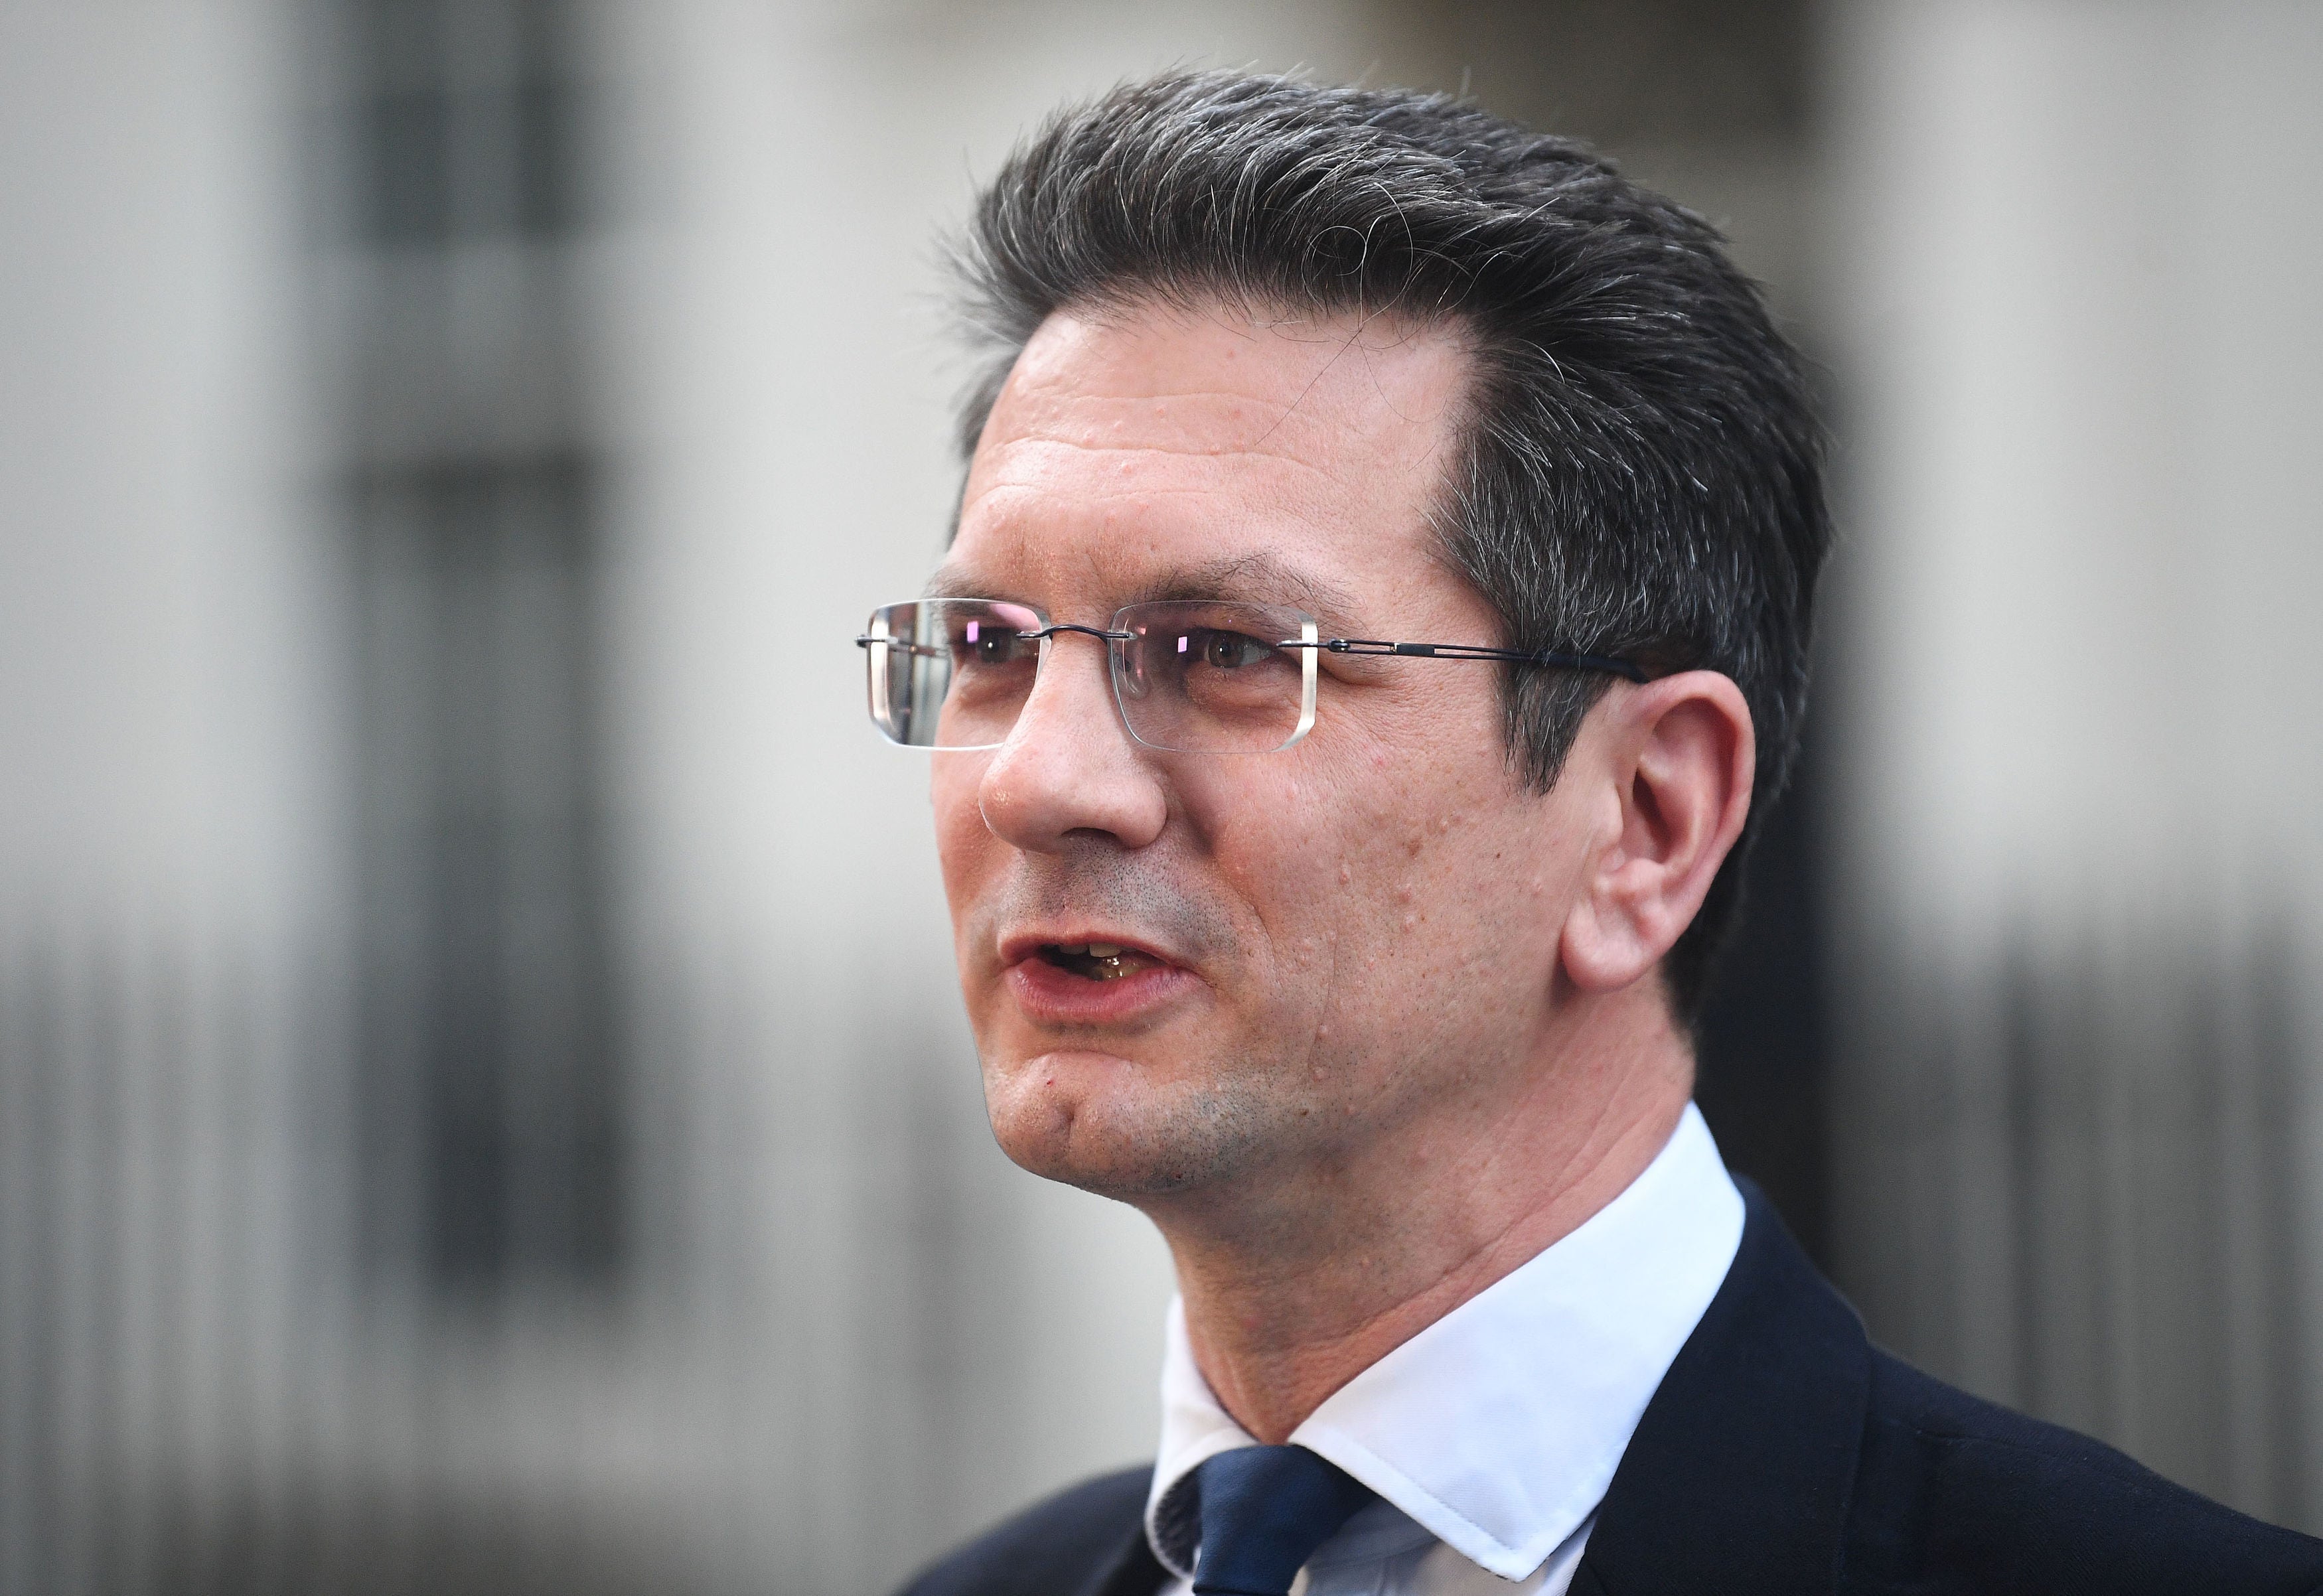 Steve Baker issued the warning to colleagues